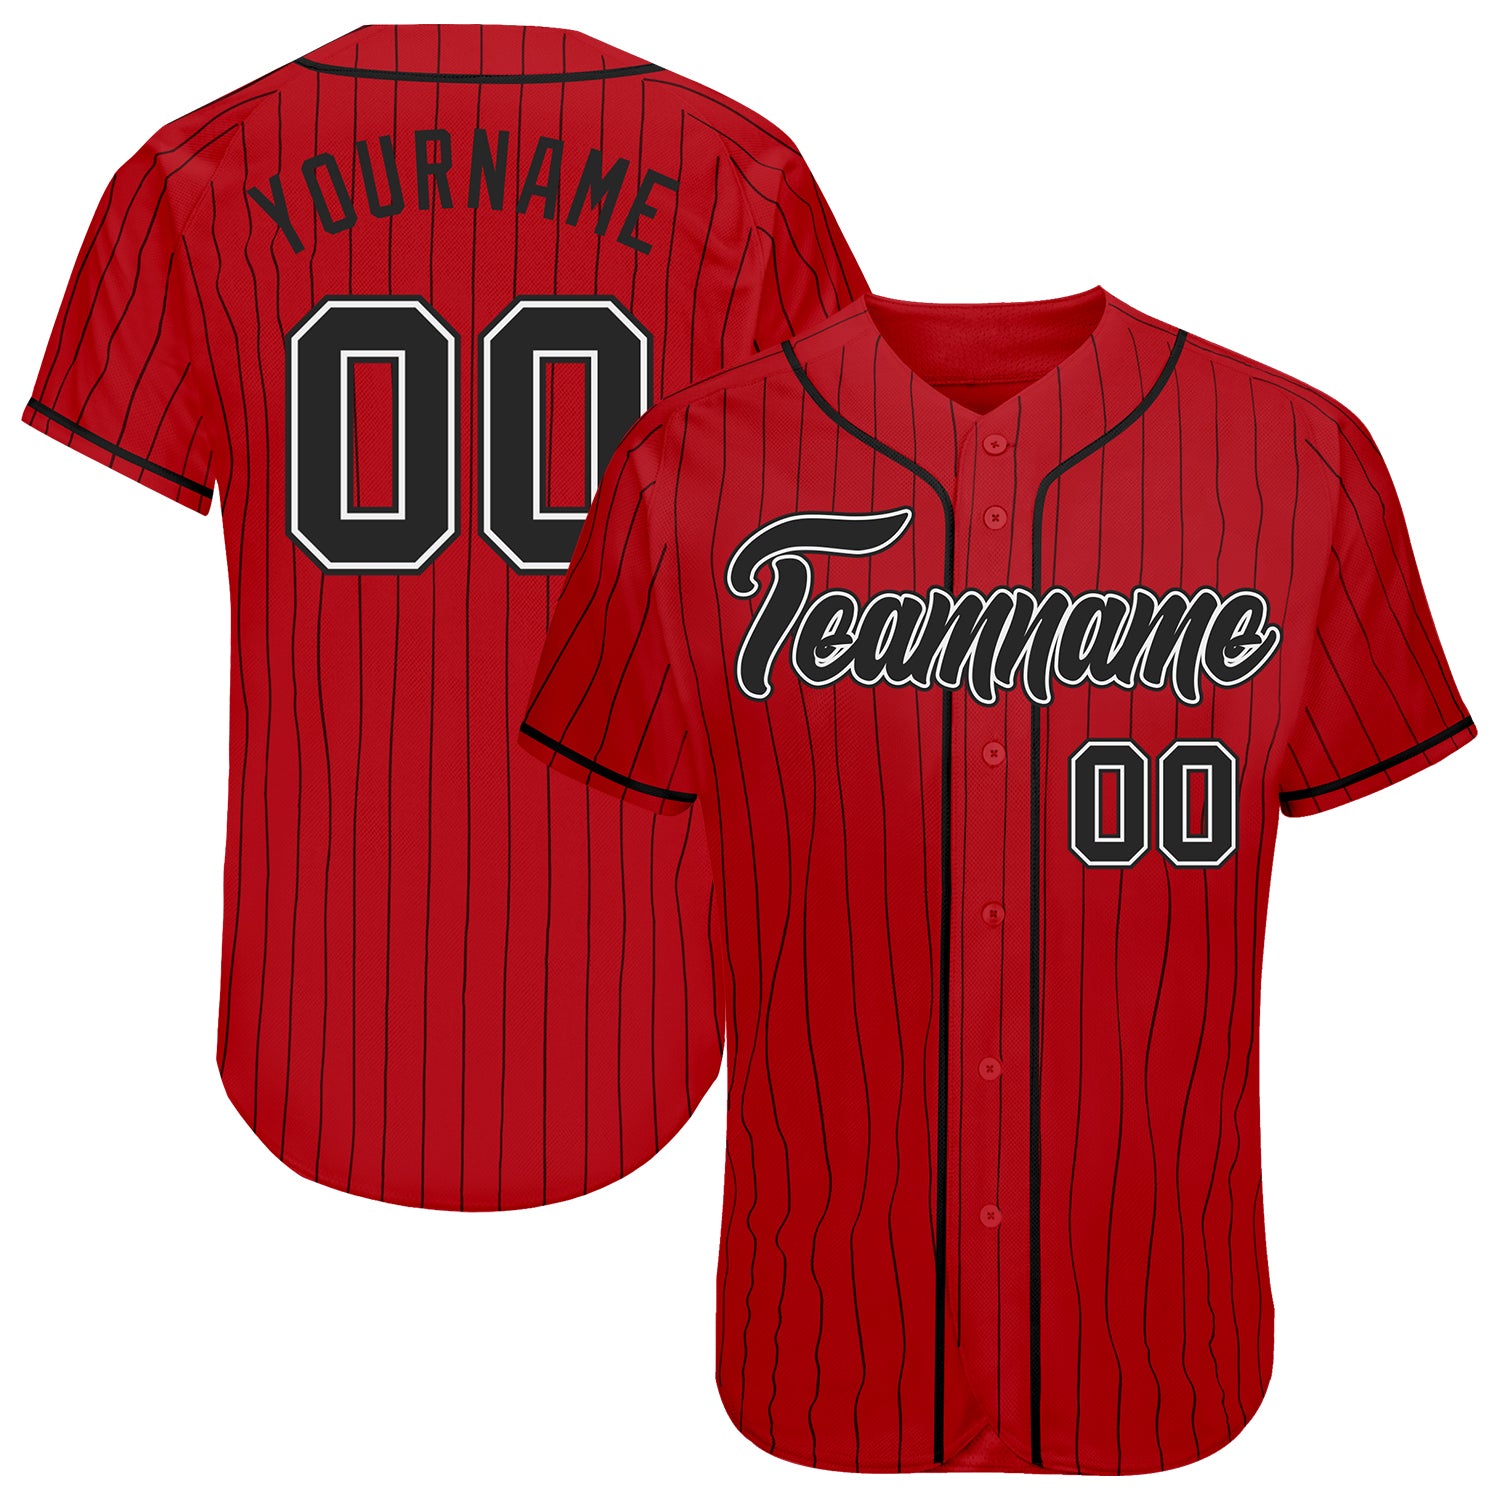 Source Vintage black baseball jersey with red lining wholesale on  m.